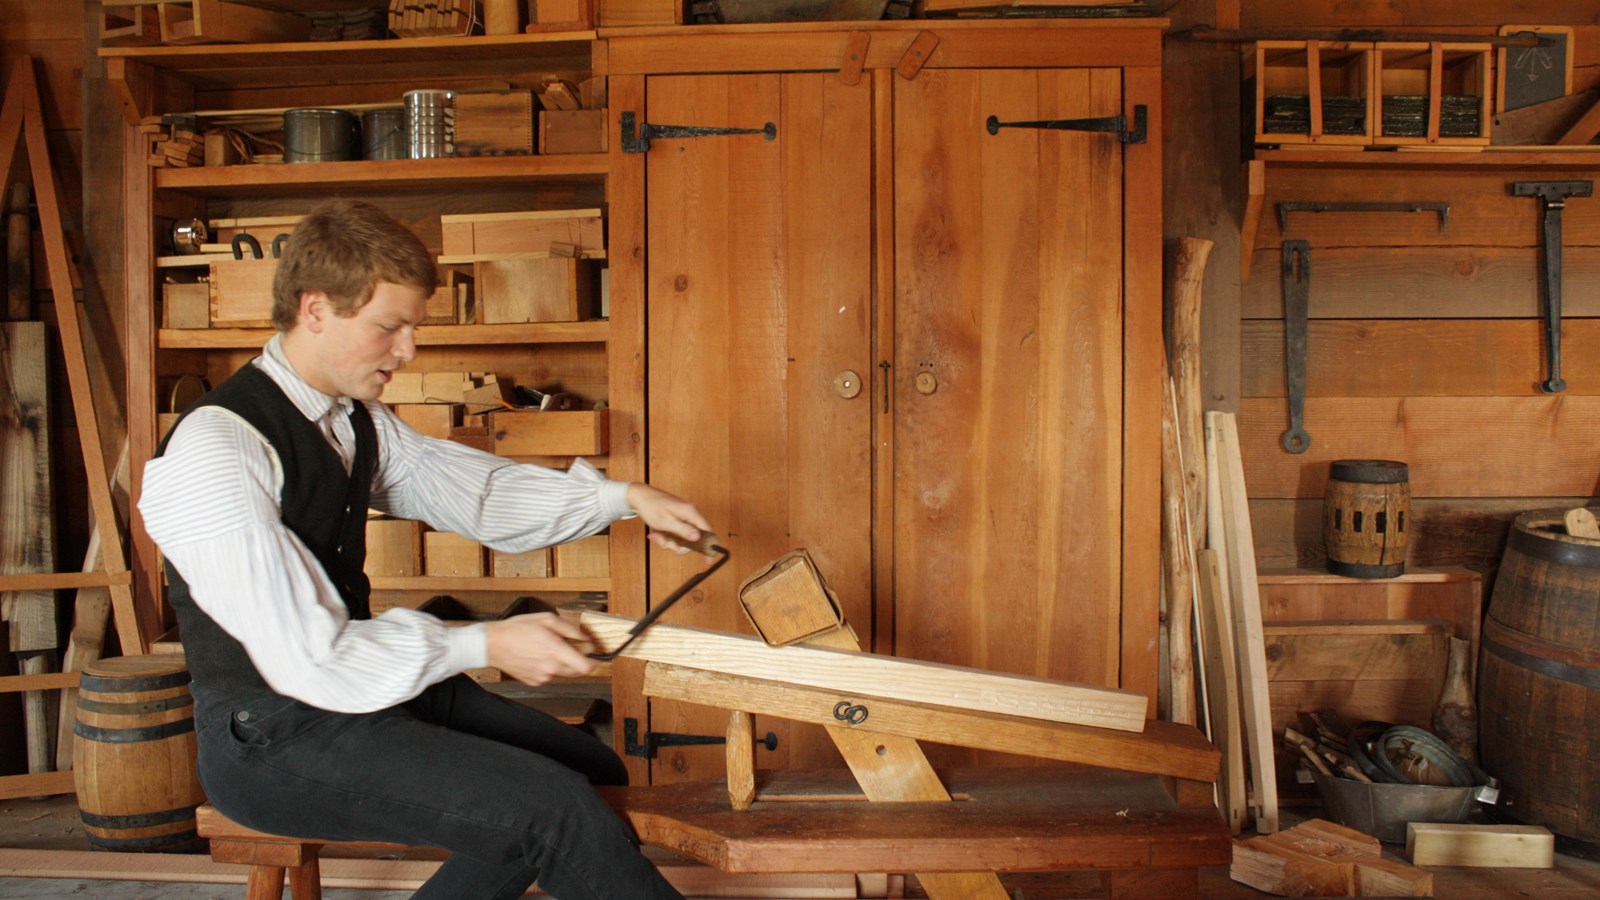 A man in 1840s clothing works on a carpentry project.